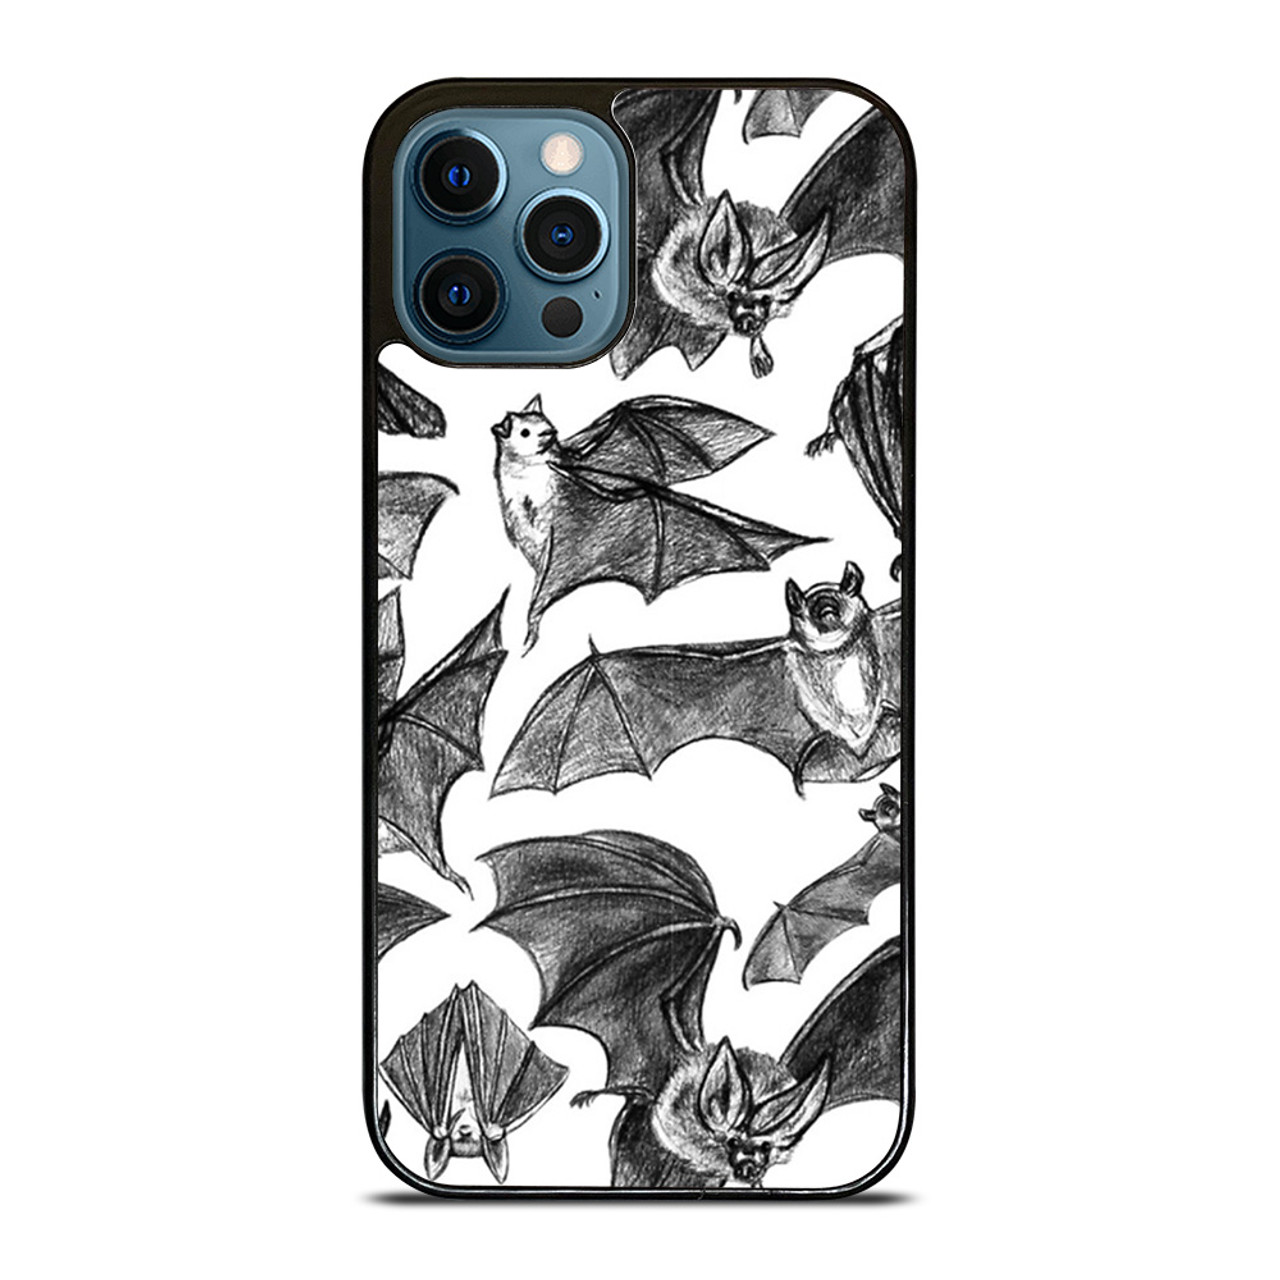 iPhone I Am Cool Cartoon Drawing Soft TPU Silicone Slim Cover Apple iPhone  7/8 4.7 inches Cute Aesthetic Fashion Phone Cases : Amazon.in: Electronics